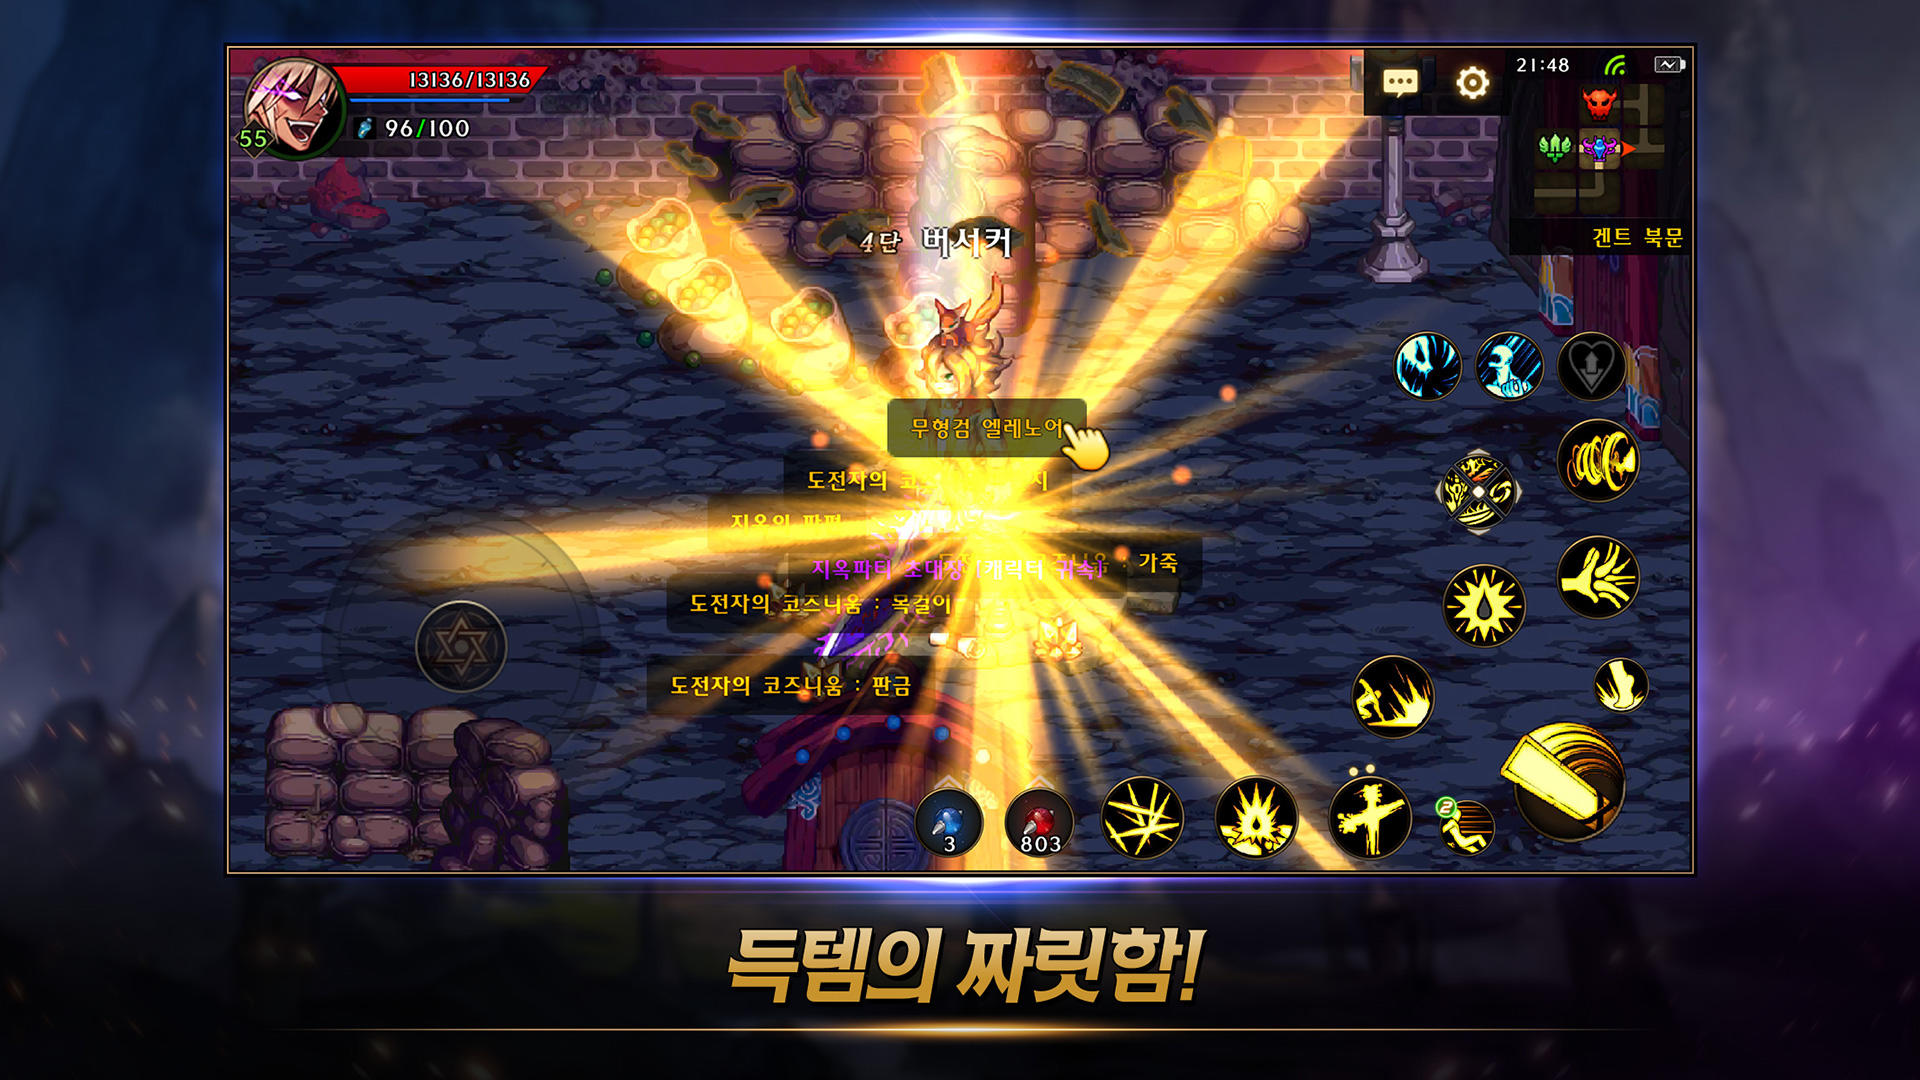 DungeonFighterMobile好玩吗 DungeonFighterMobile玩法简介